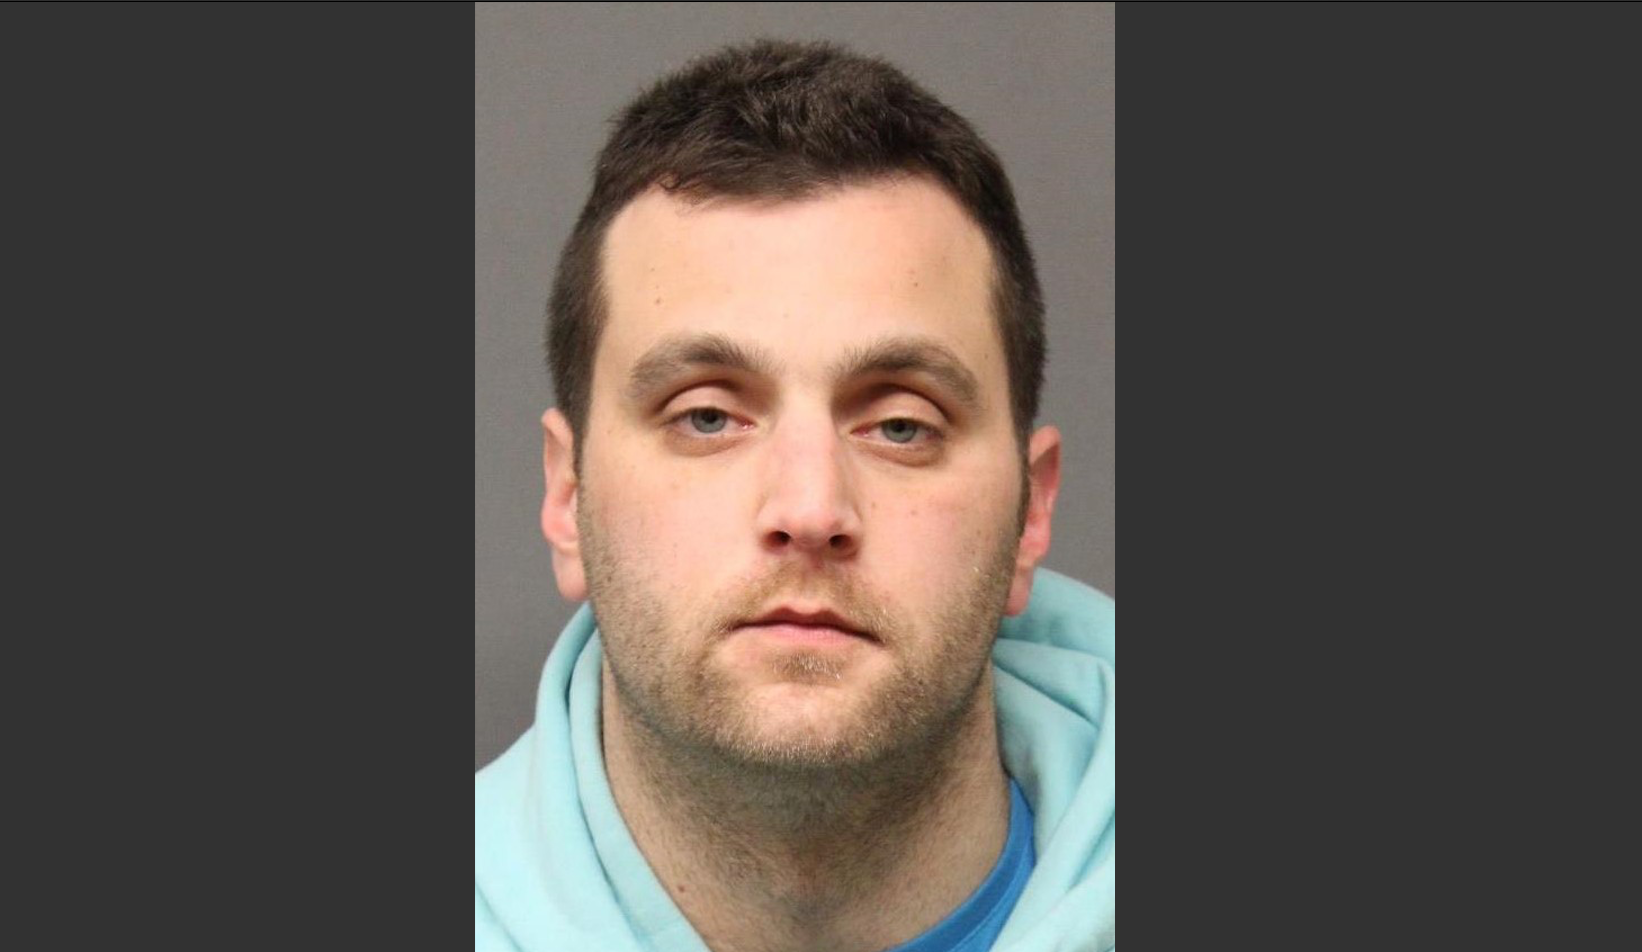 Township man adds child porn to his list of charges over meth, Xanax, GHB — Pascack Press and Northern Valley Press picture